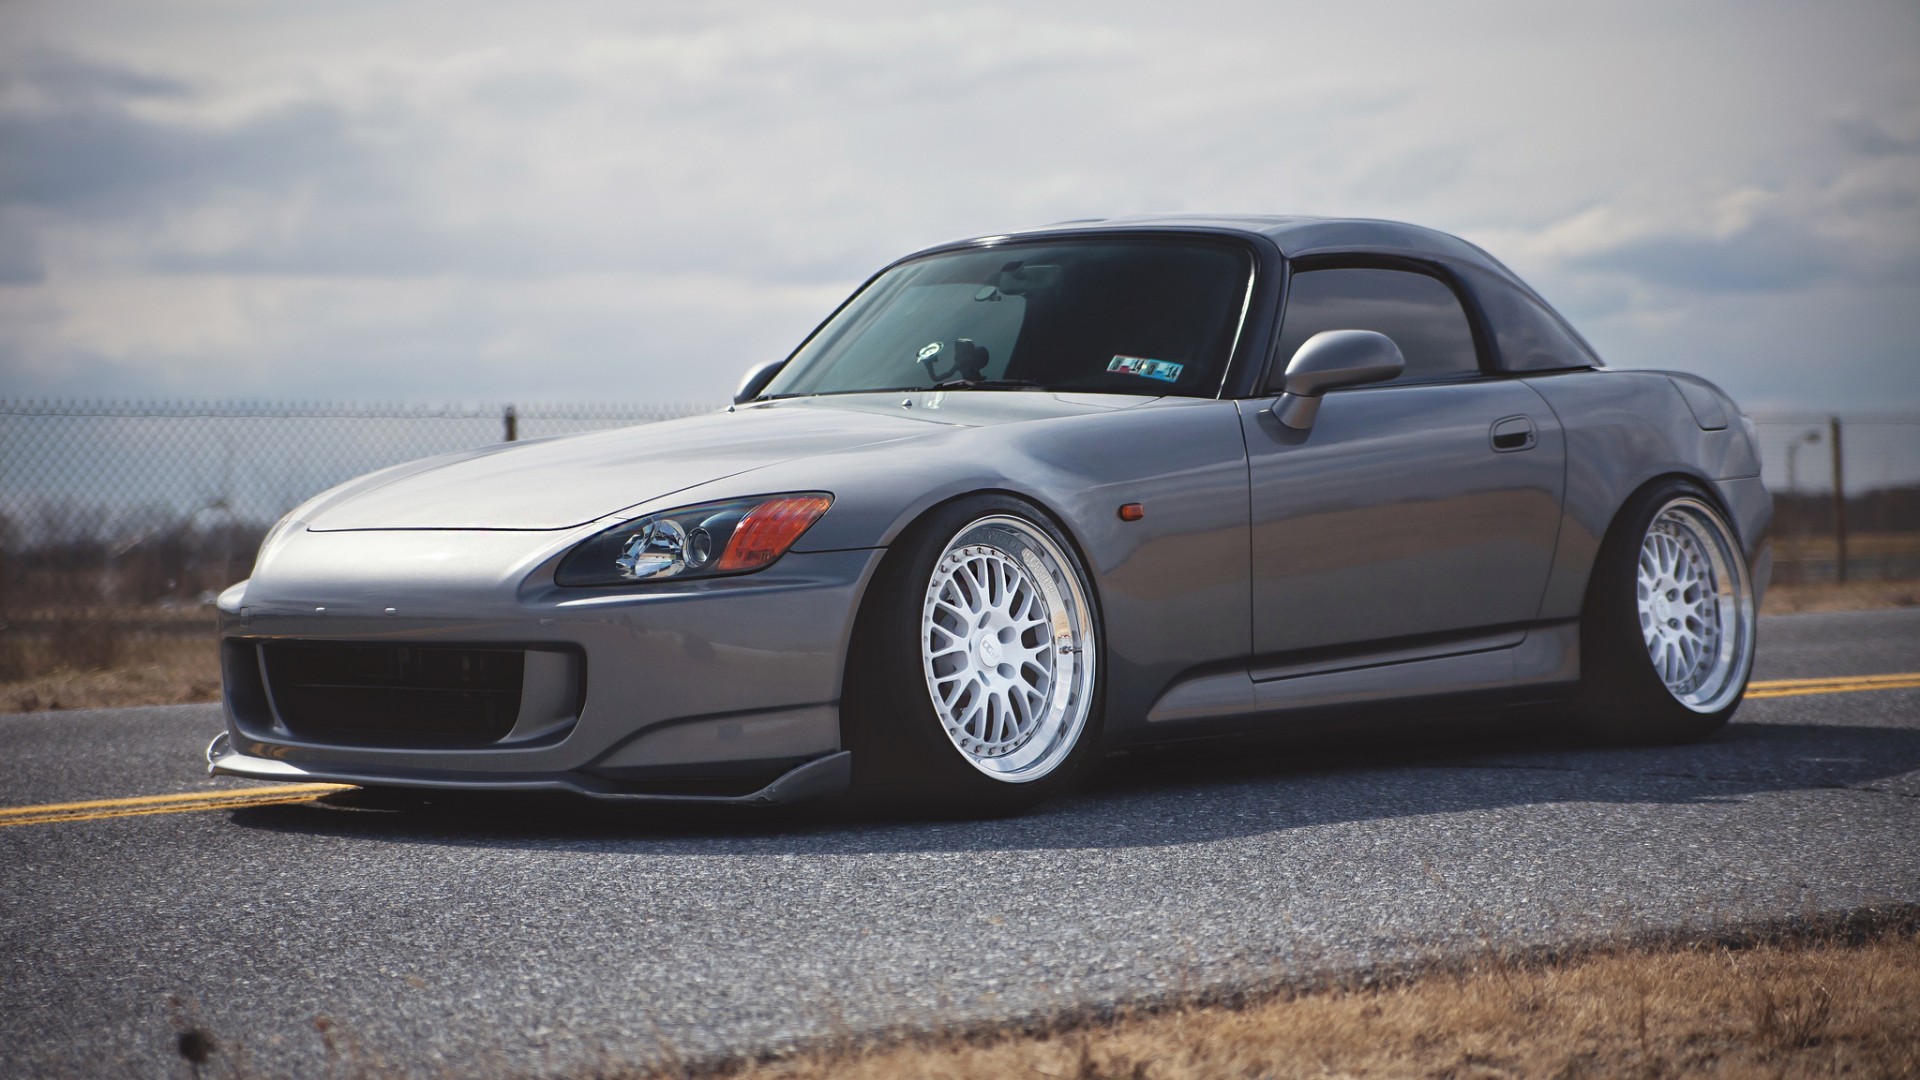 Honda S2000 Wallpapers Images Photos Pictures Backgrounds